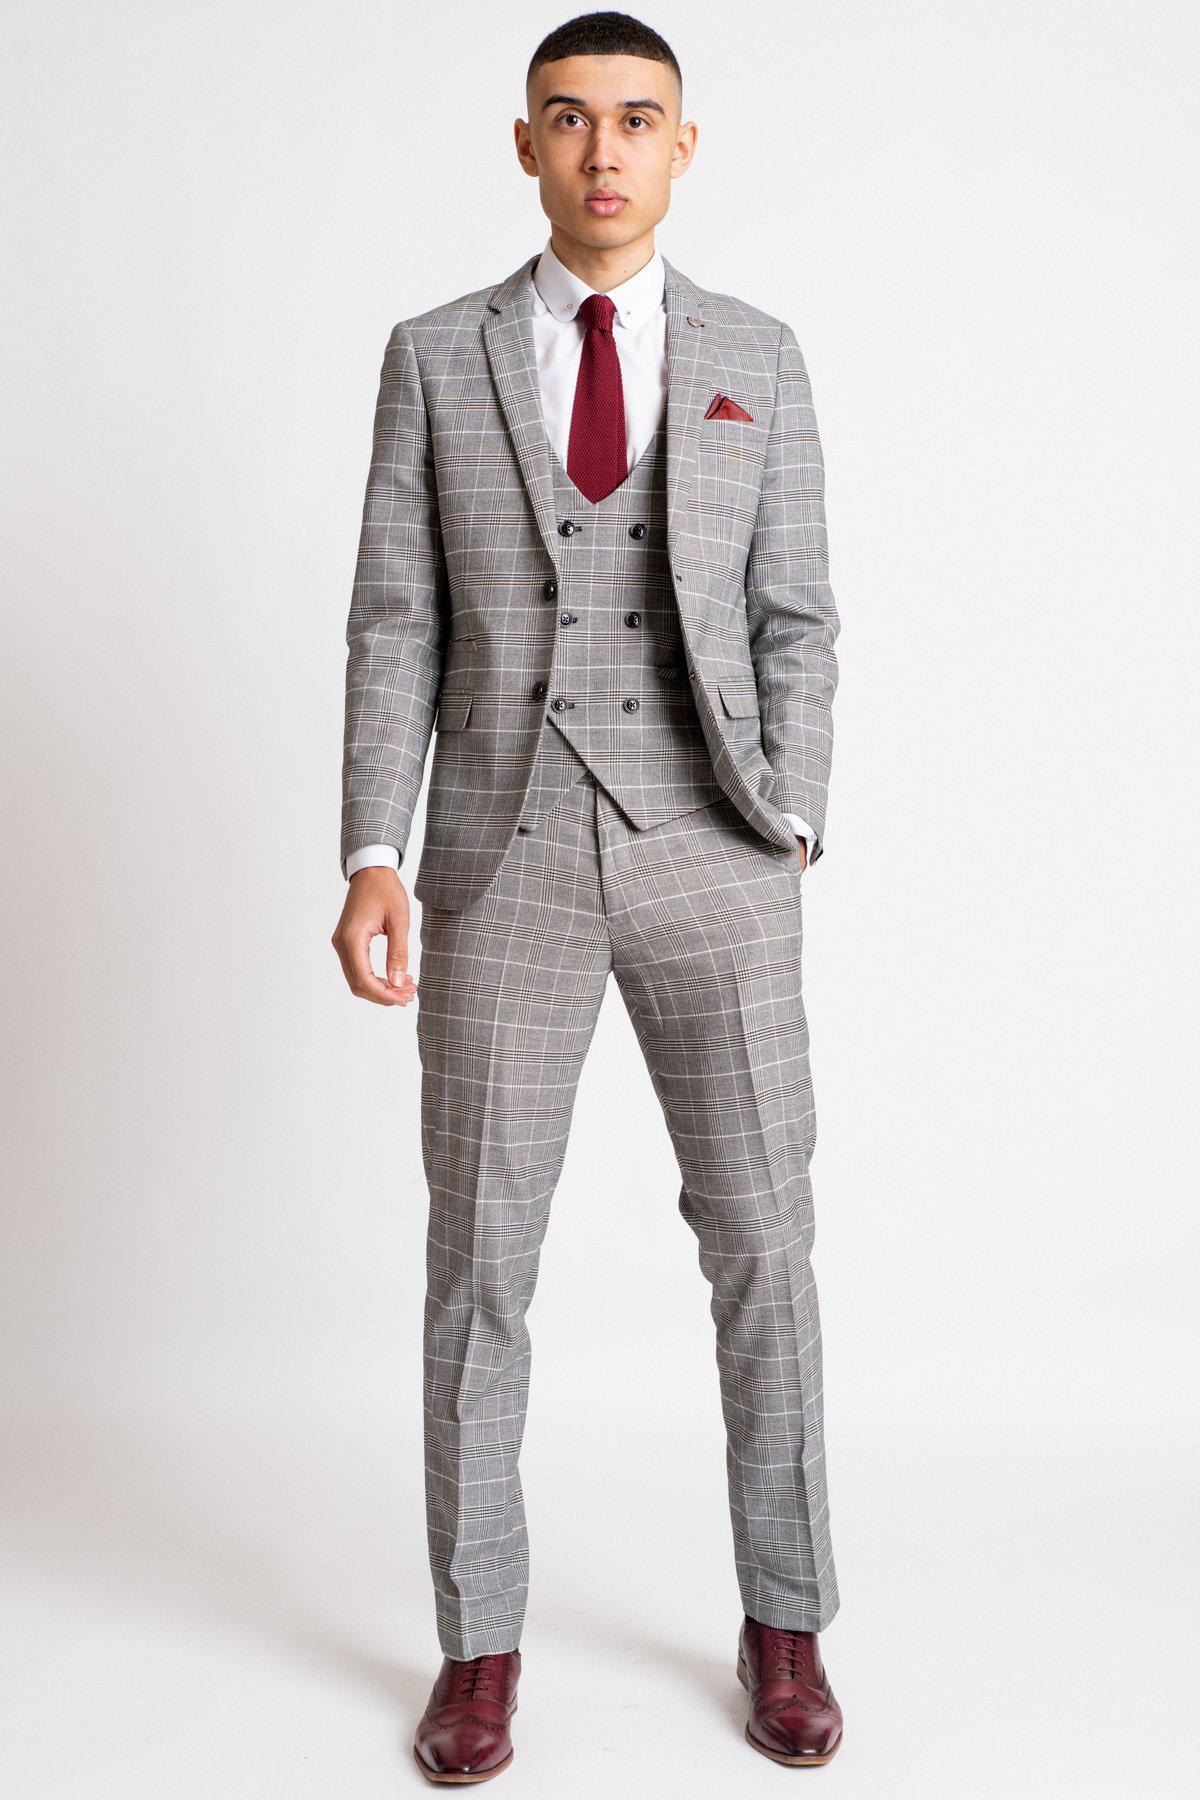 Olympic Swimmer James Guy in Ross Grey Check Suit – Marc Darcy